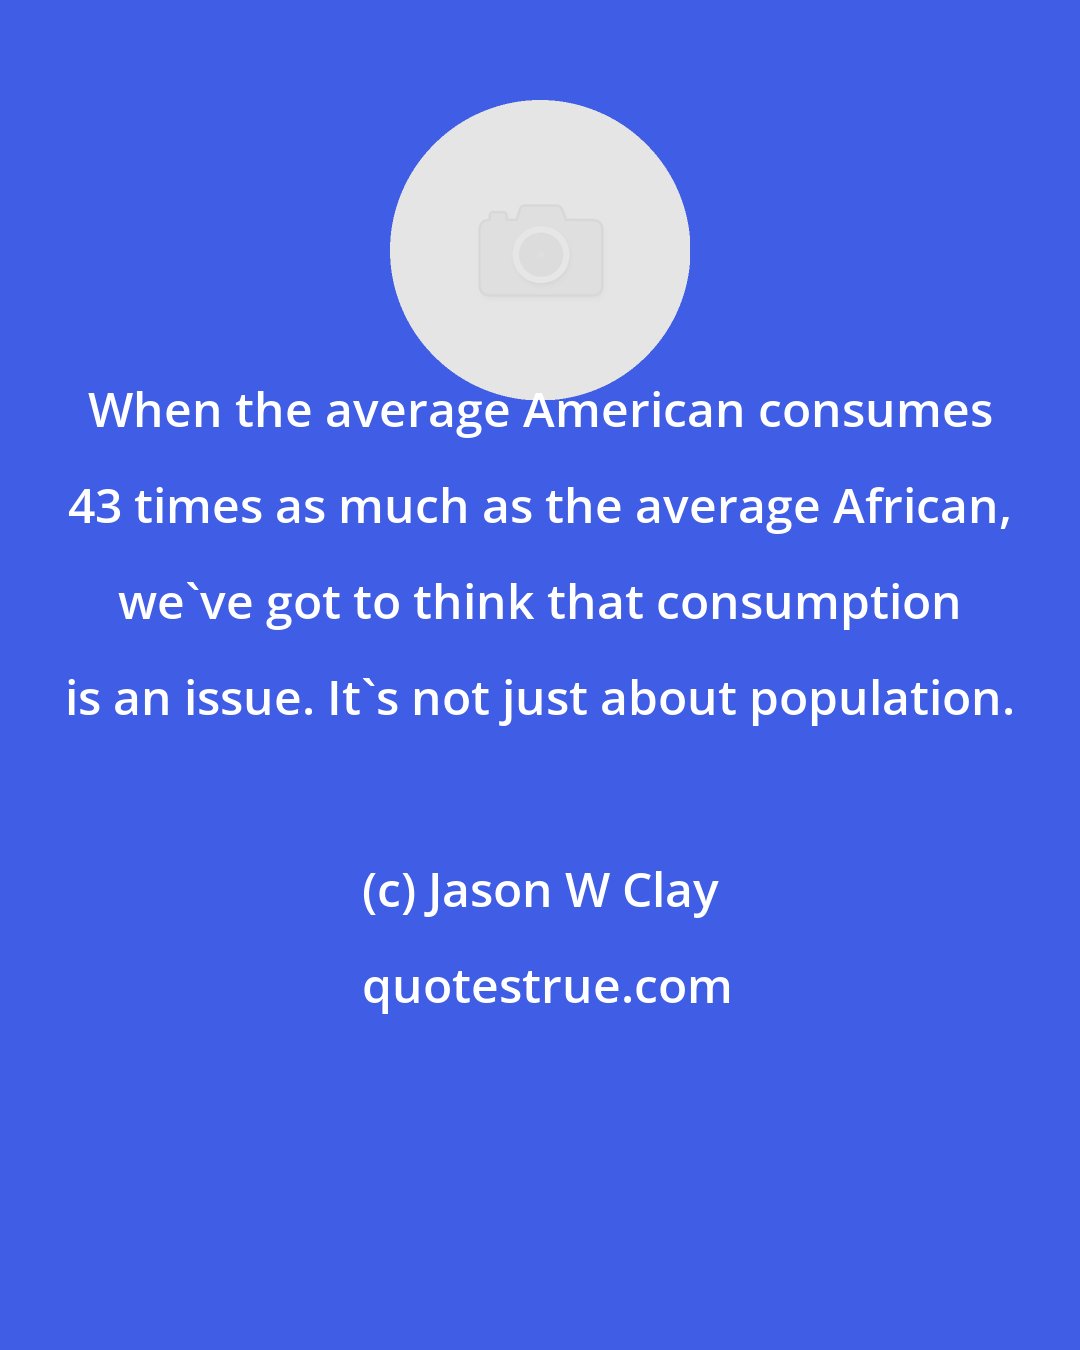 Jason W Clay: When the average American consumes 43 times as much as the average African, we've got to think that consumption is an issue. It's not just about population.